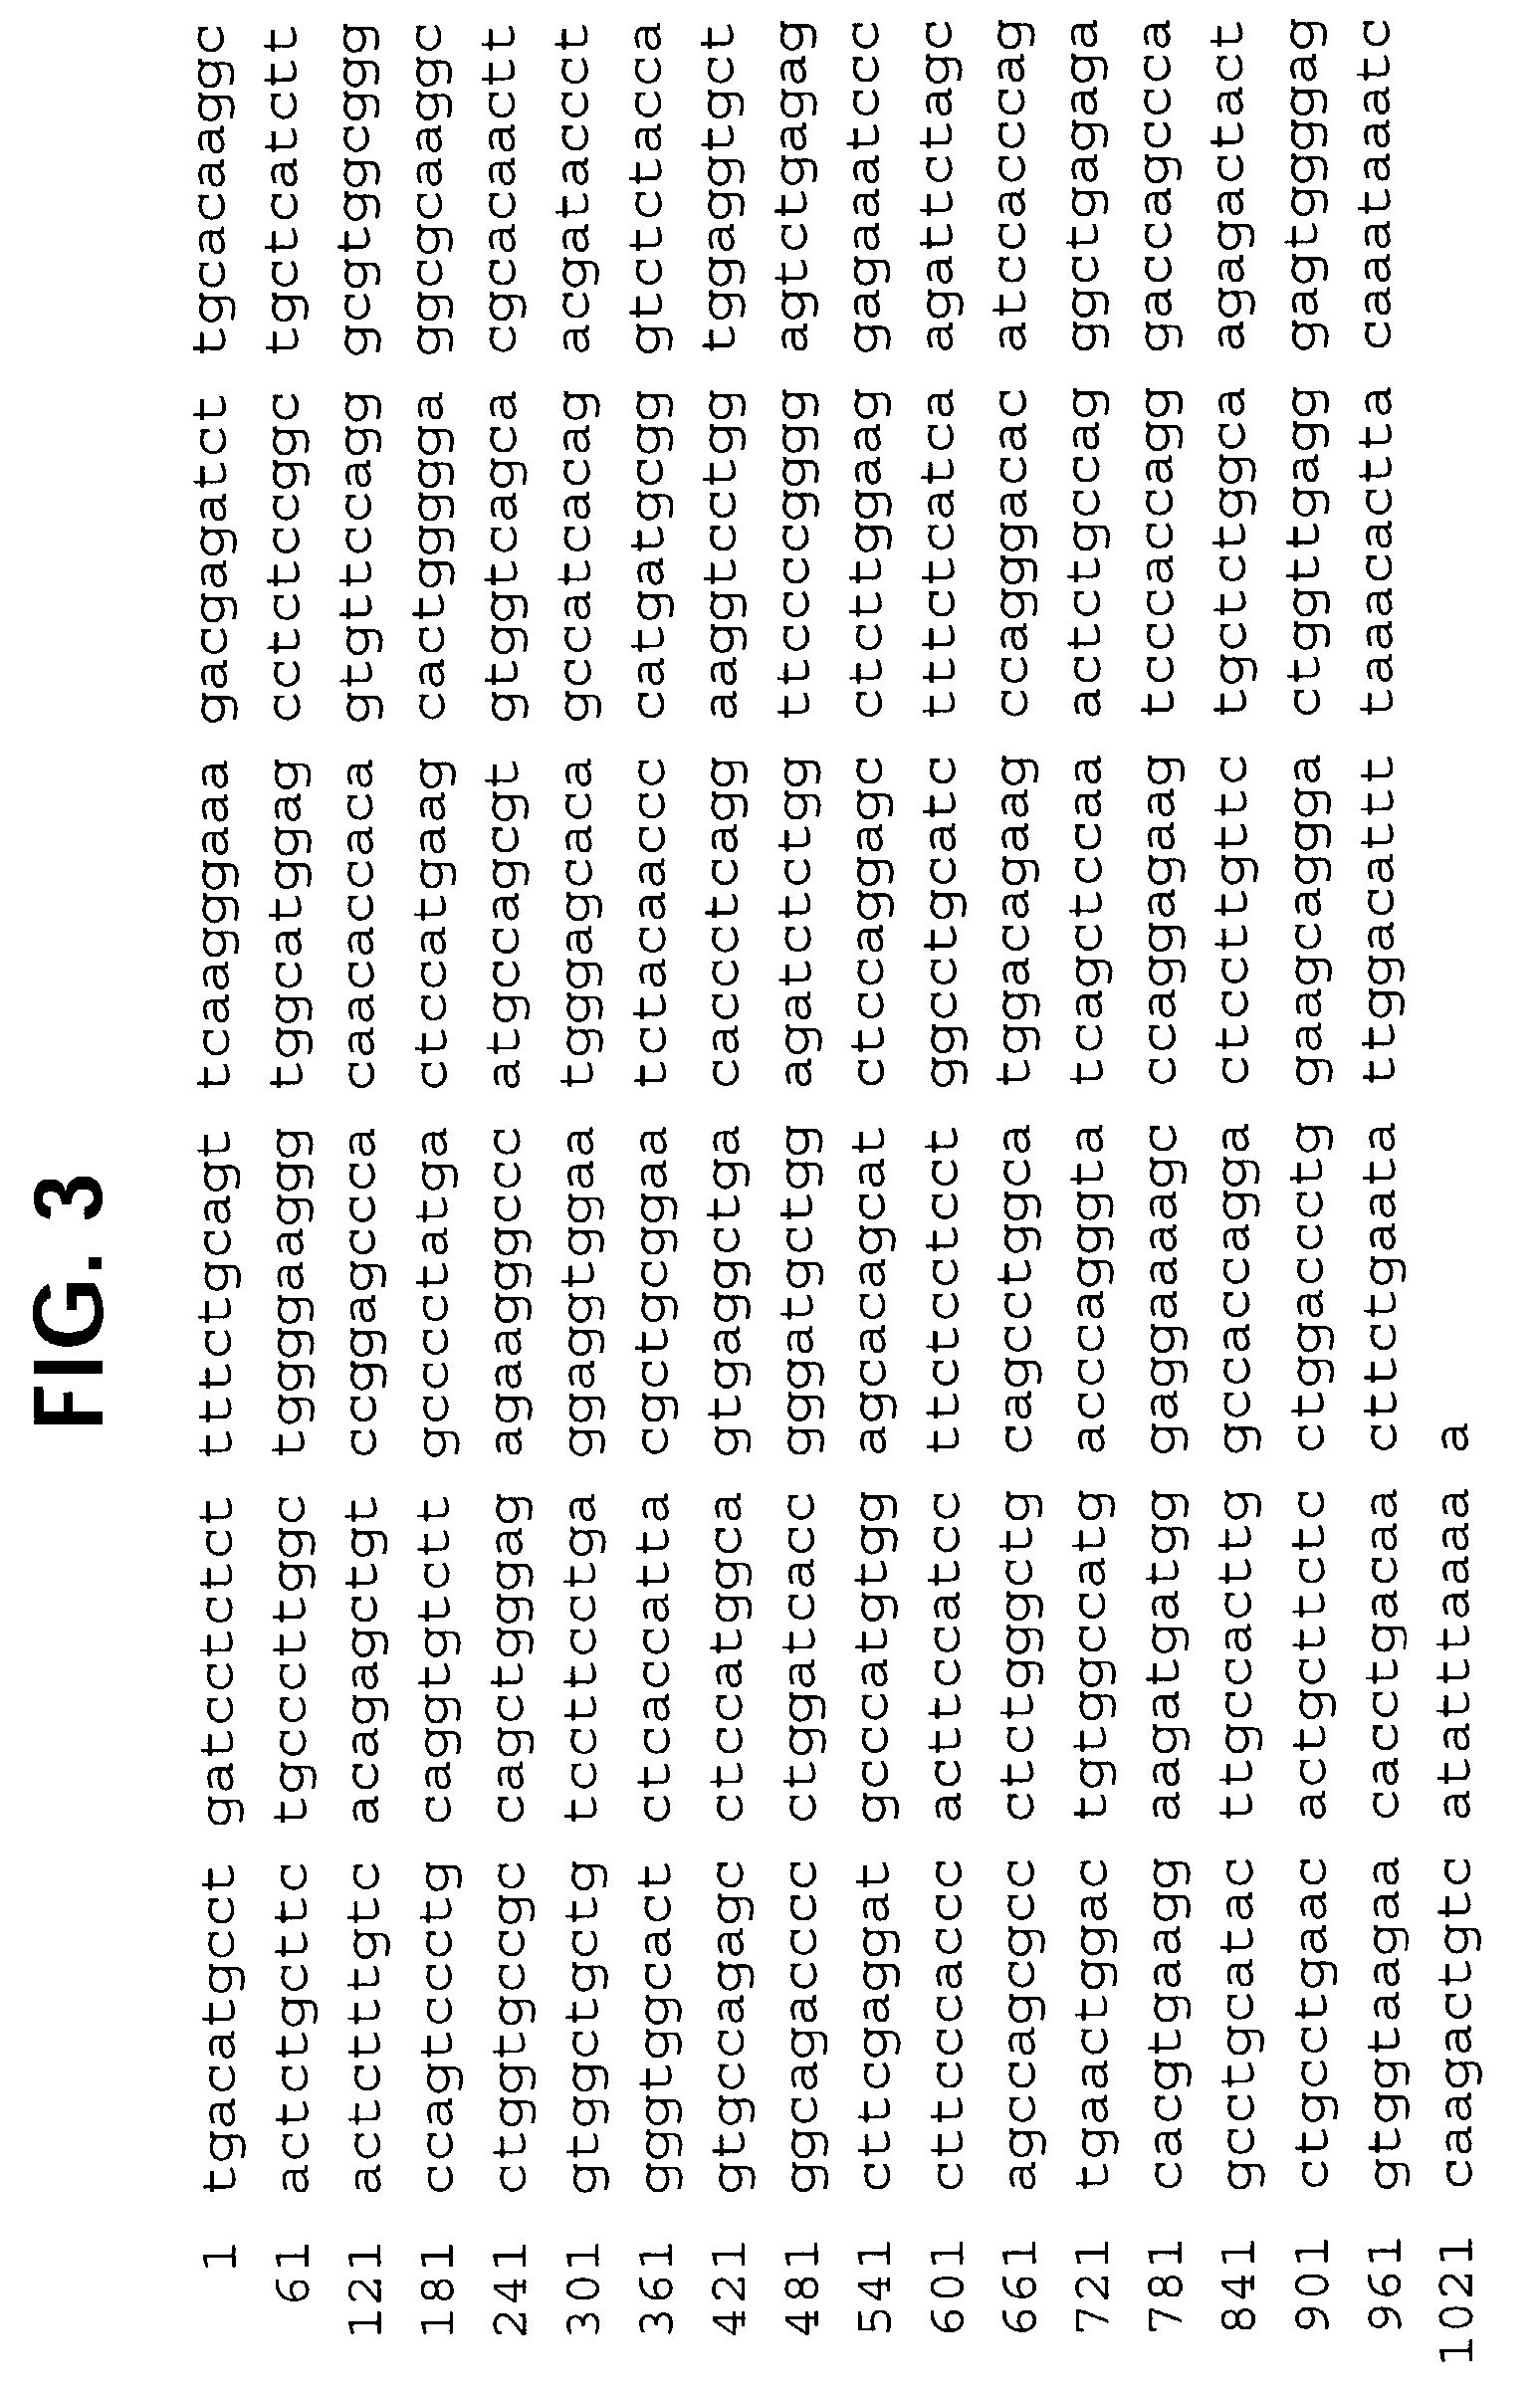 Novel receptor TREM (triggering receptor expressed on myeloid cells) and uses thereof